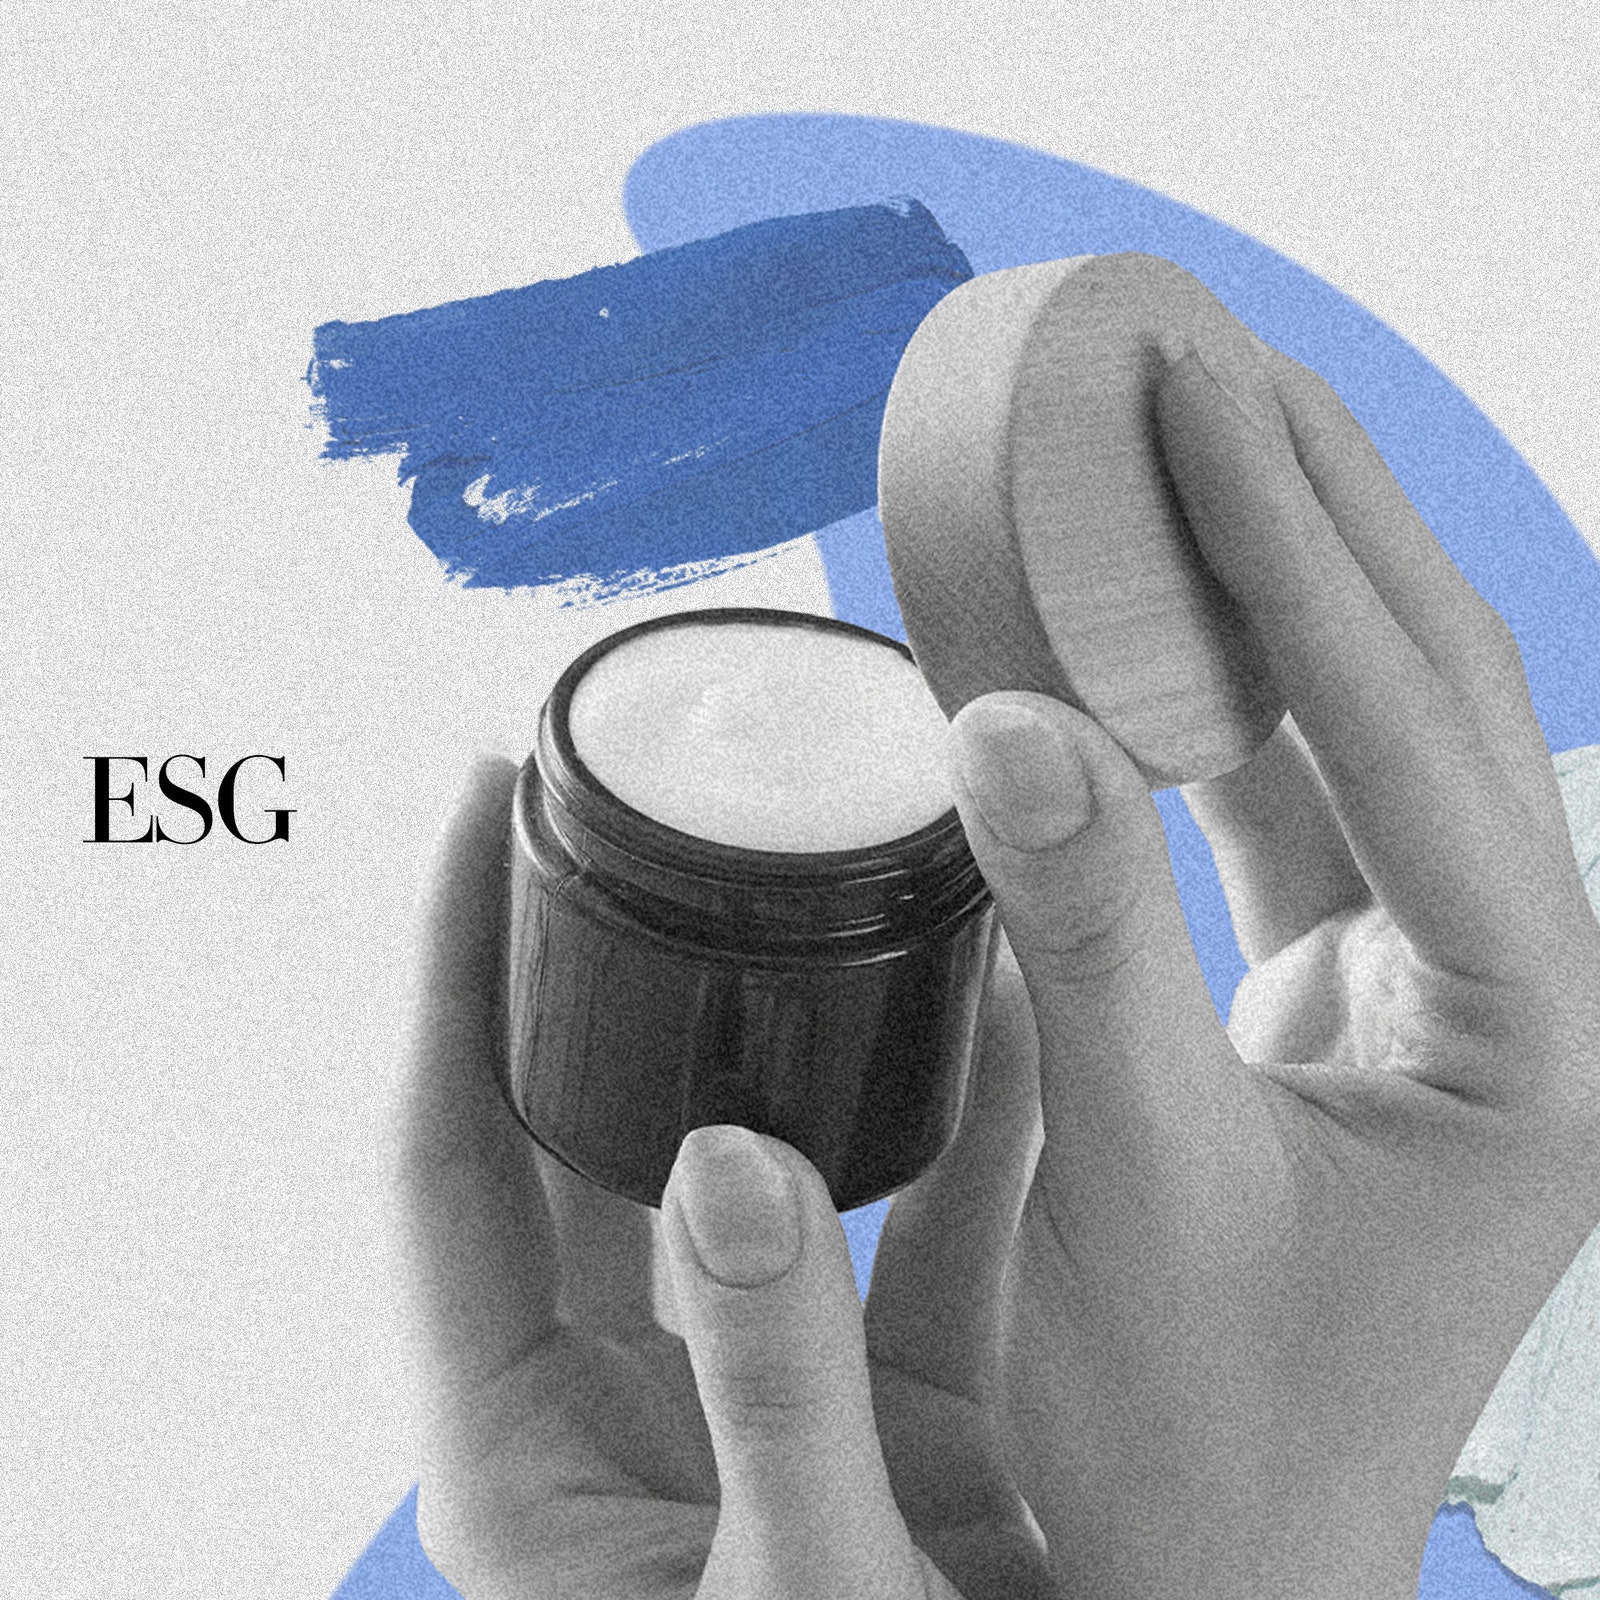 Aesop and The Ordinary bridge the communication gap in ESG